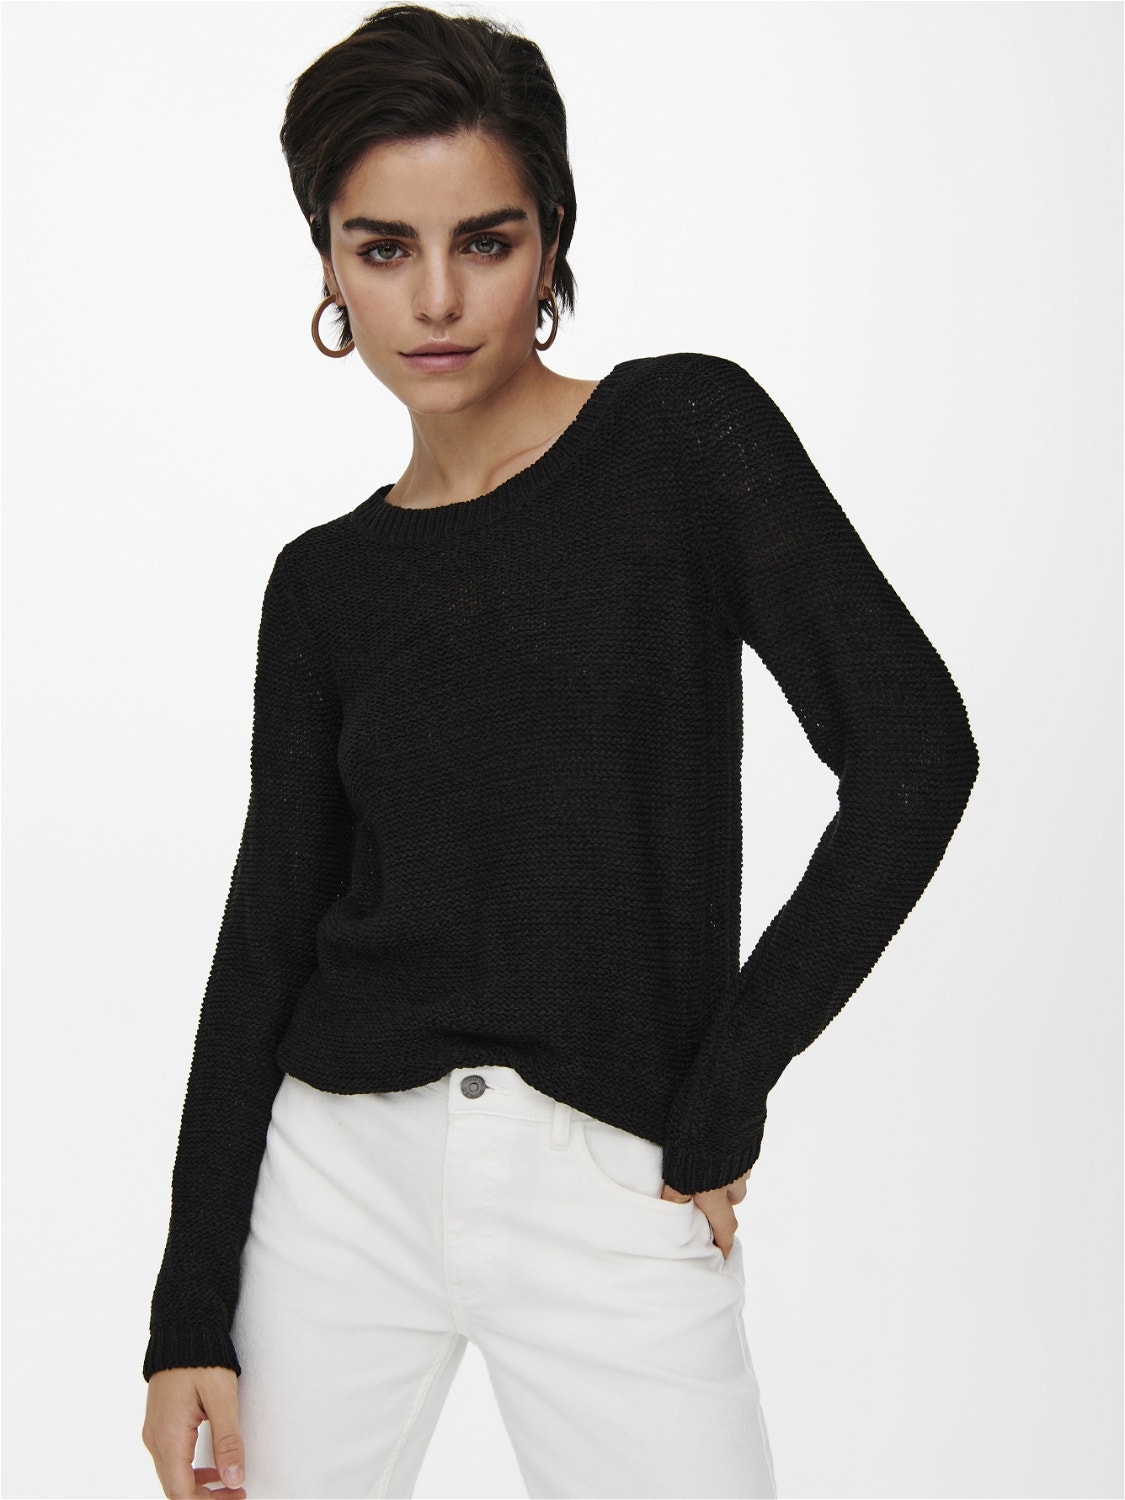 ONLY Texture Knitted Pullover -Black - 15113356